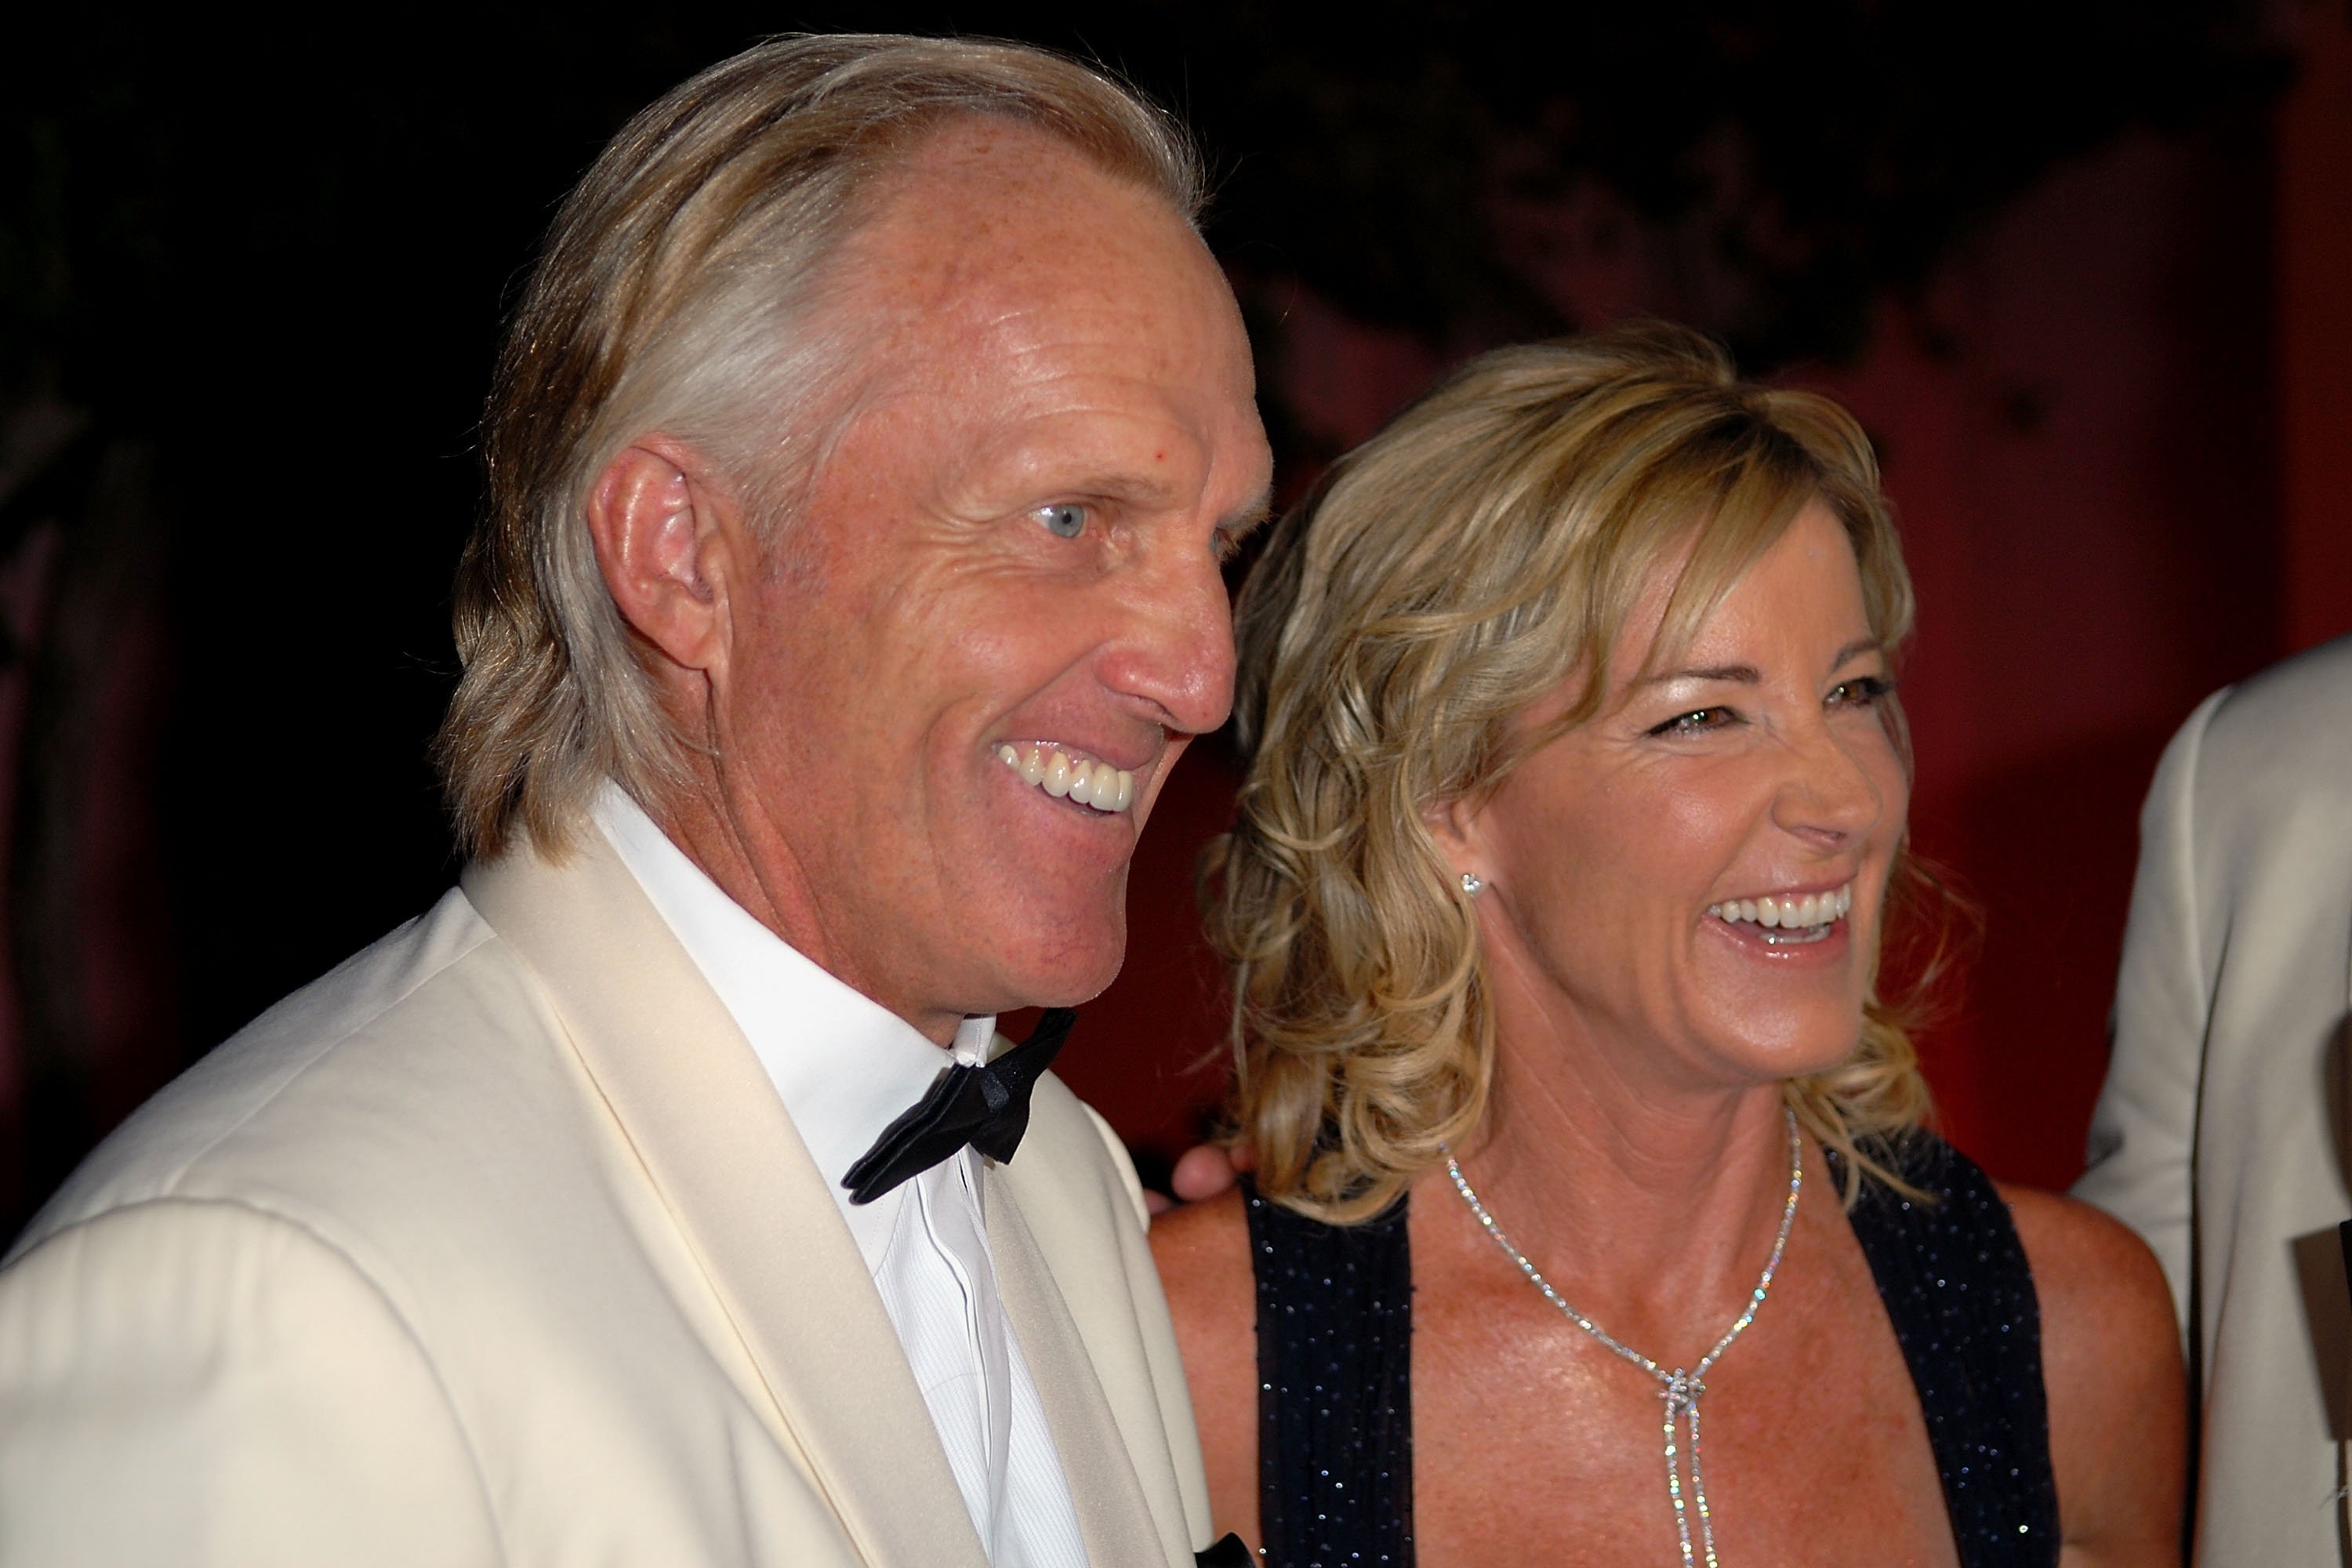 Greg Norman and Chris Evert at the Chris Evert/Raymond James Pro Celebrity Tennis cocktail reception in 2007, in Boca Raton, Florida. | Source: Getty Images